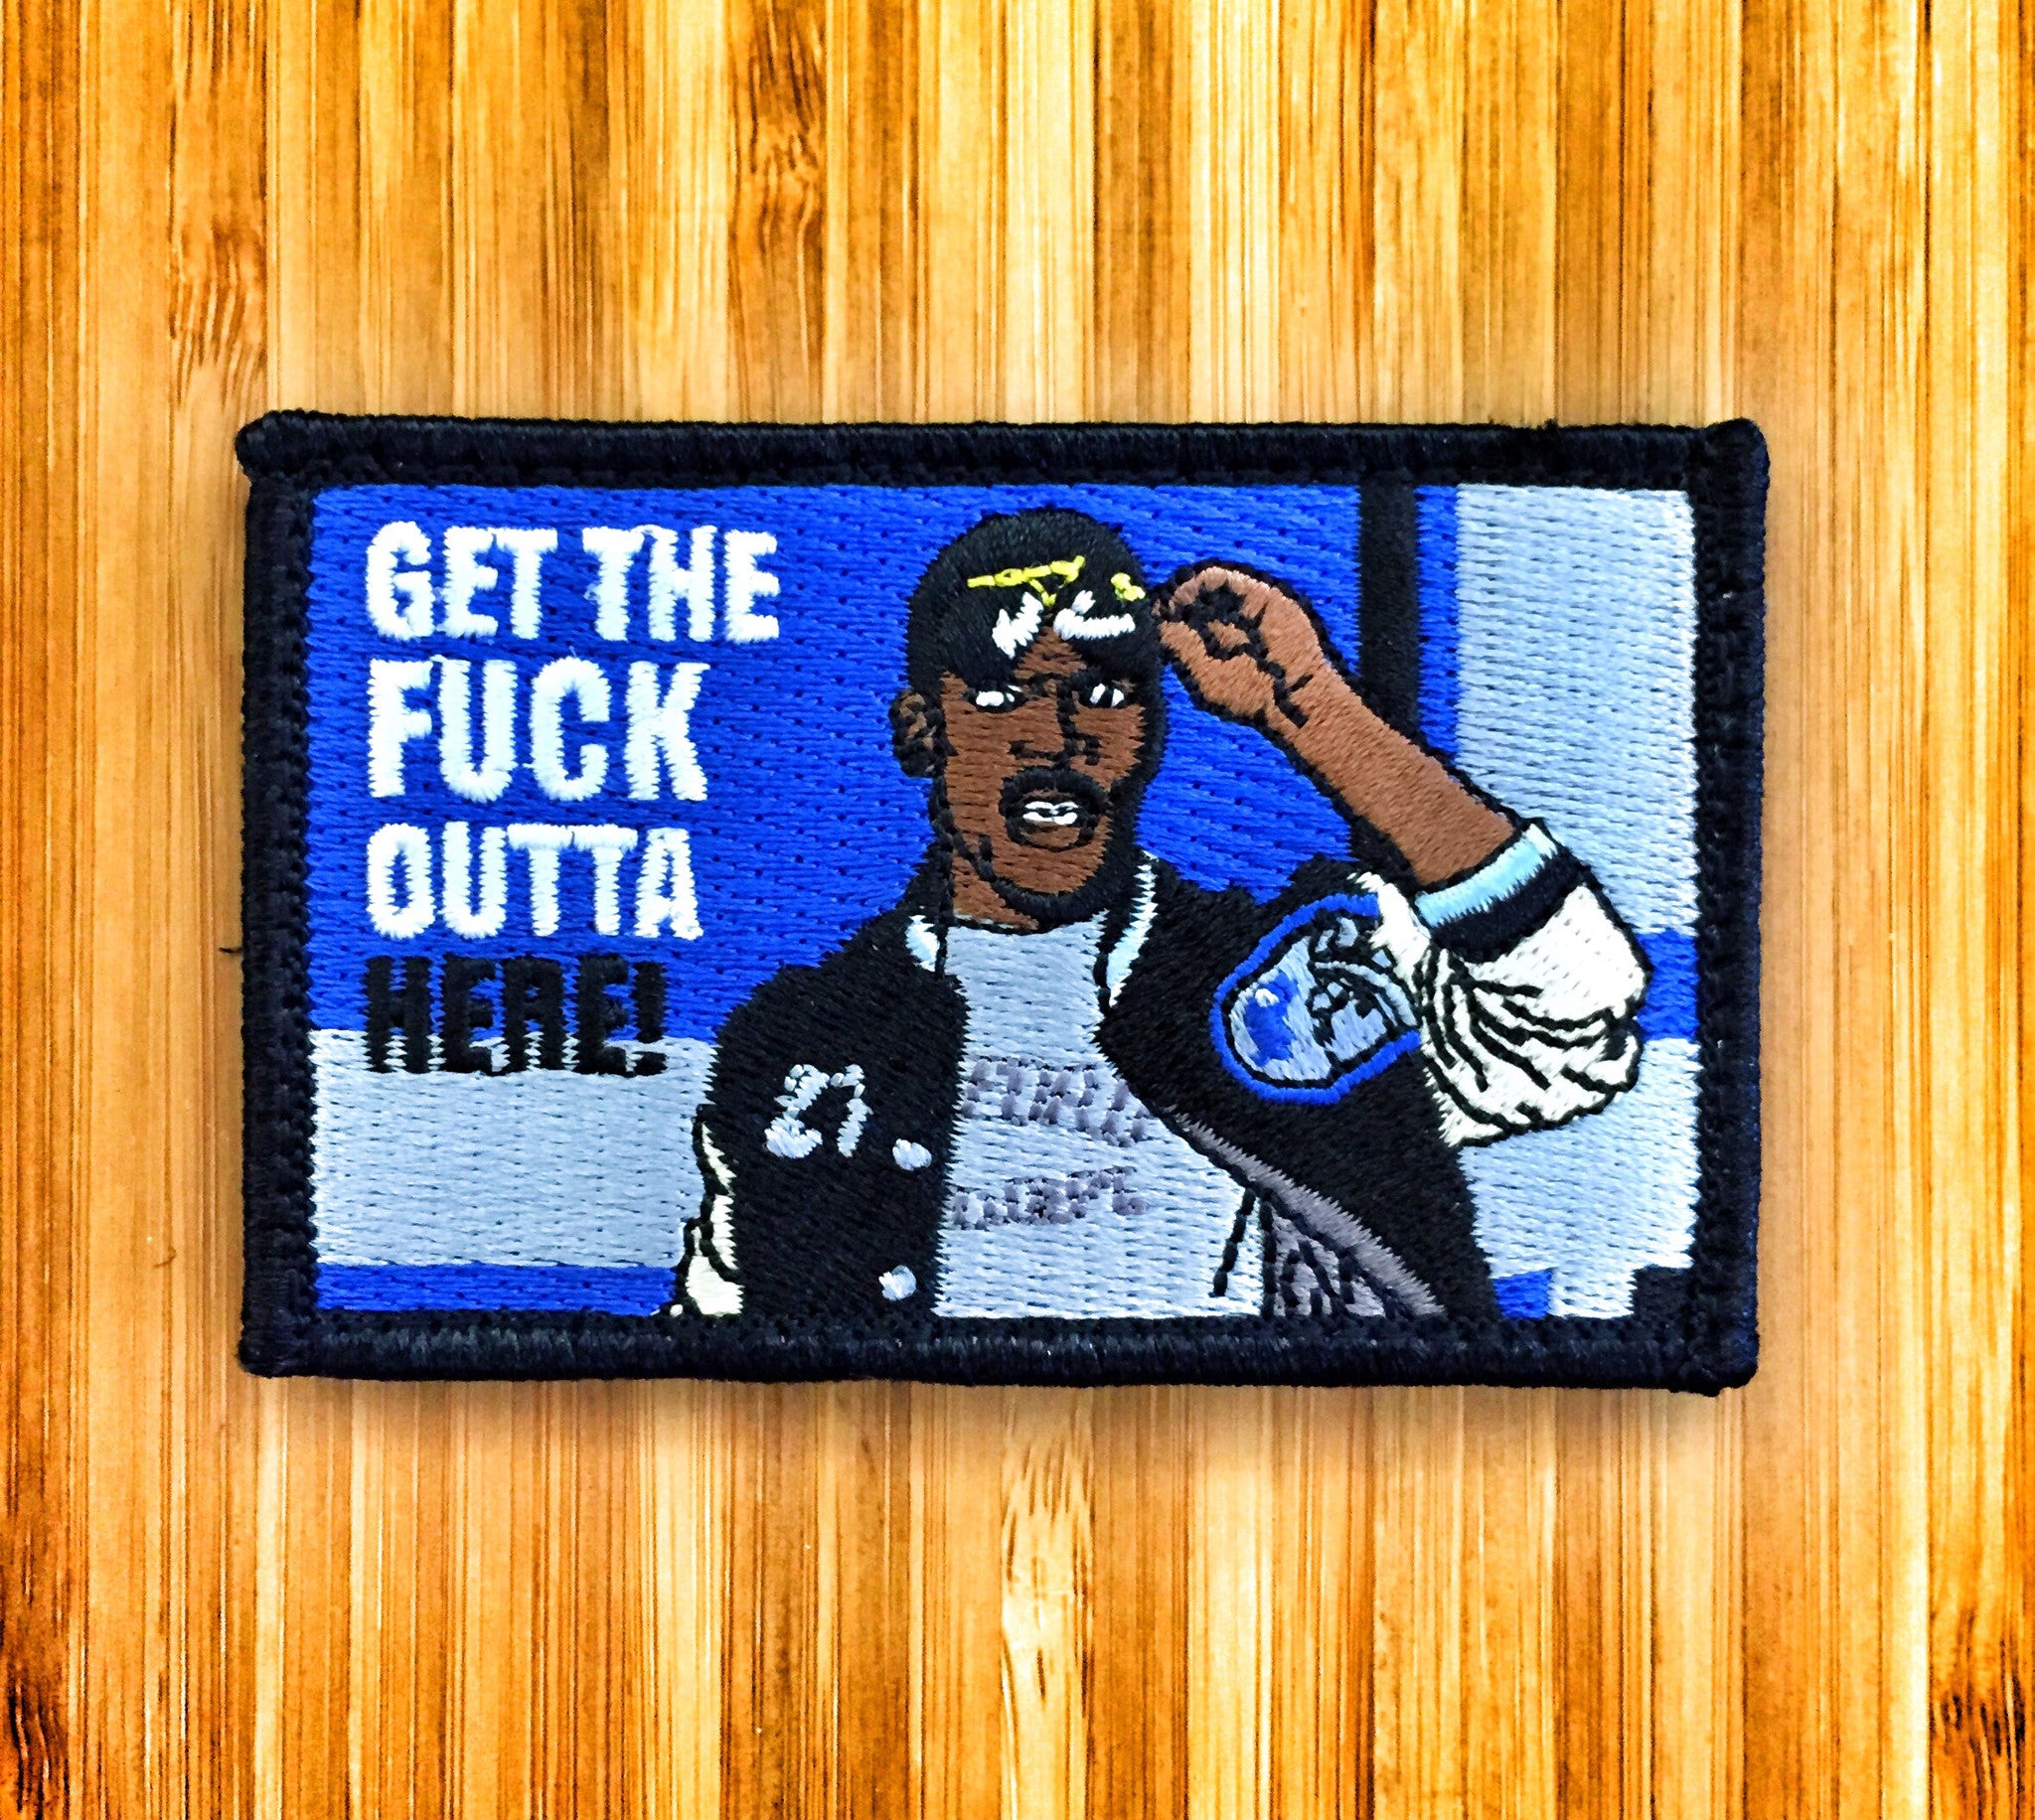 Embroidered patch depicting a man holding sunglasses above his head with text that reads Get the fuck outta here